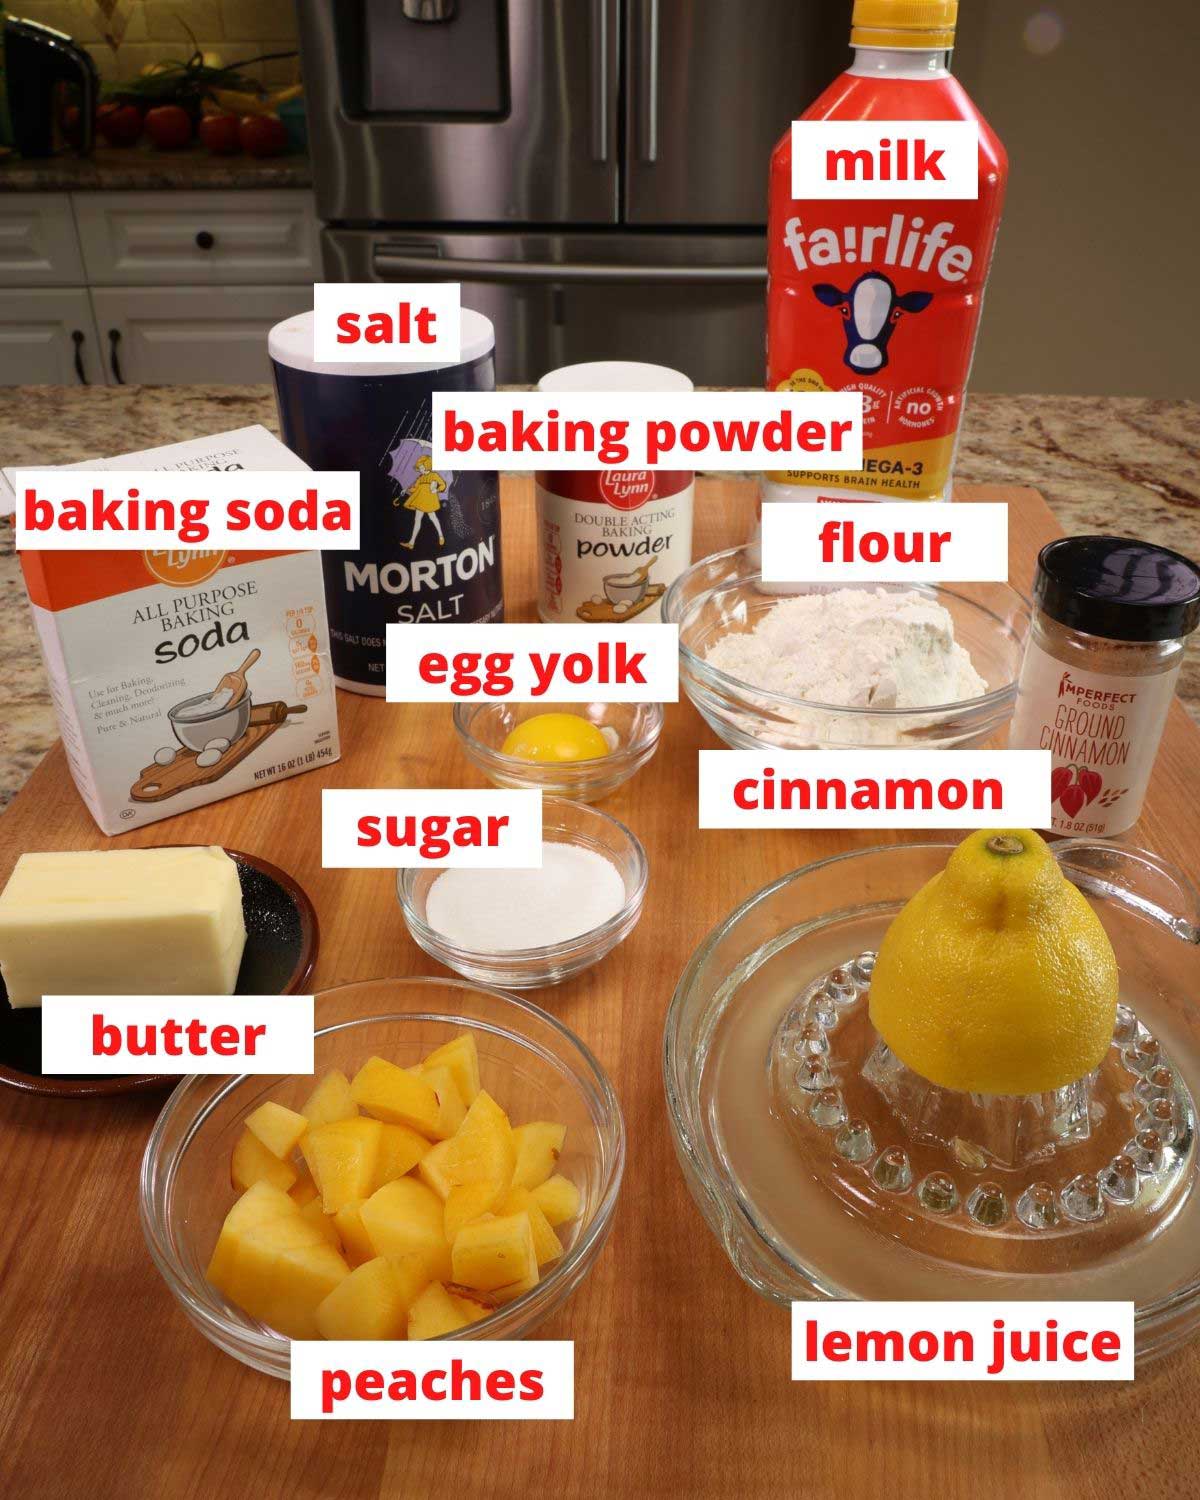 Ingredients for peach scones: diced peaches, butter, sugar, eggs, milk, flour and other pantry staples on a wooden cutting board.